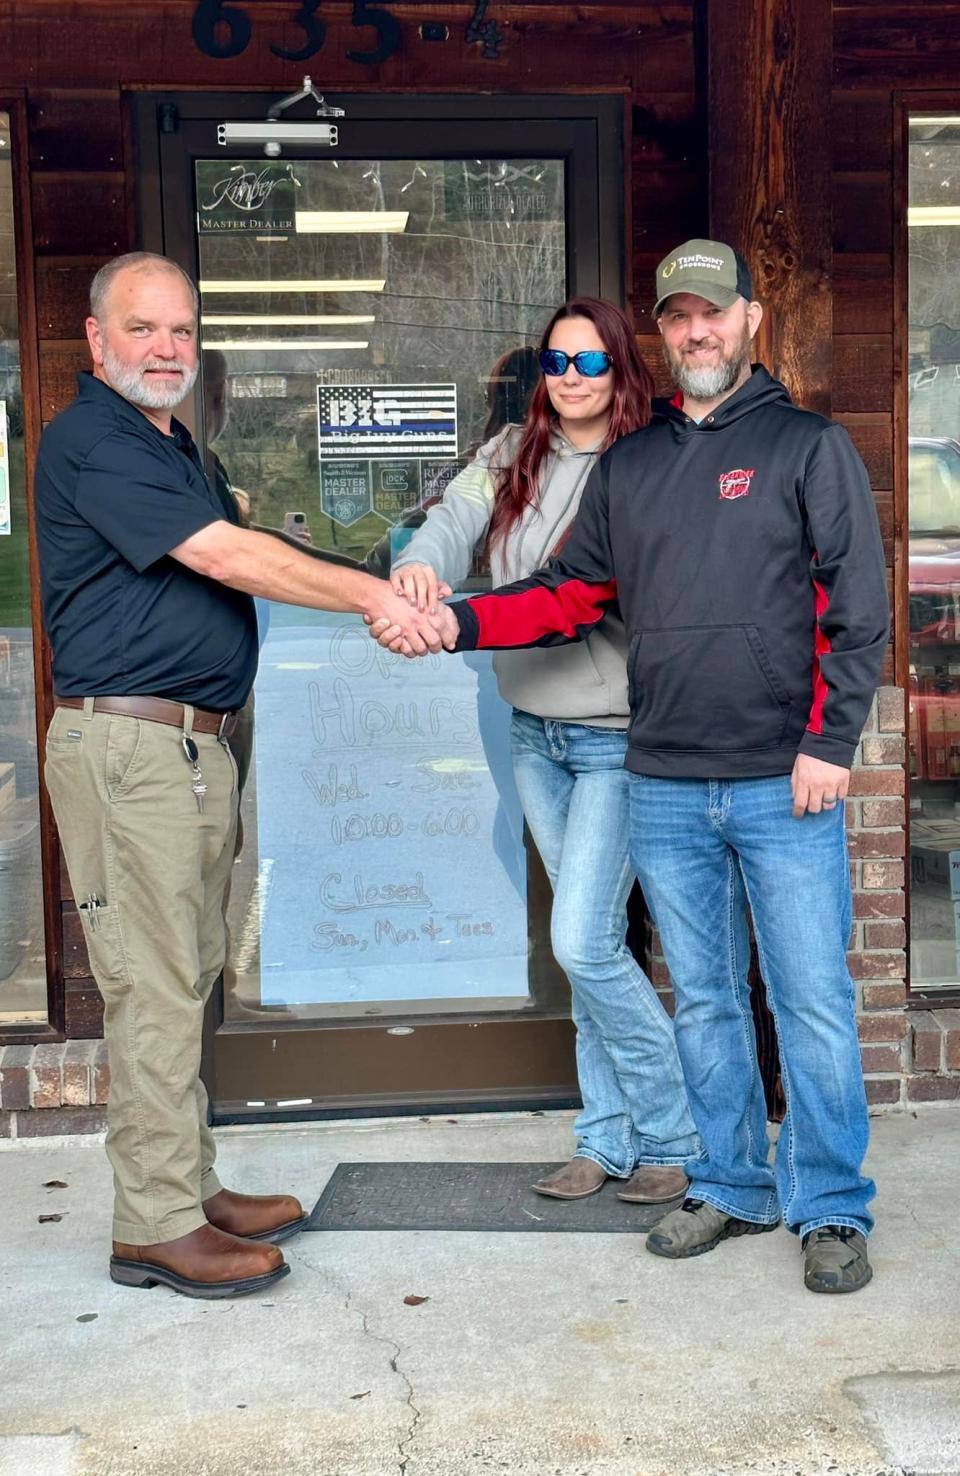 Big Ivy Guns owner Quincy Brock, left, shakes hands with Blueridge Firearms Unlimited owners Jerica and Jason Lawson to commemorate Blueridge Firearms Unlimited's acquisition of the Mars Hill gun store.